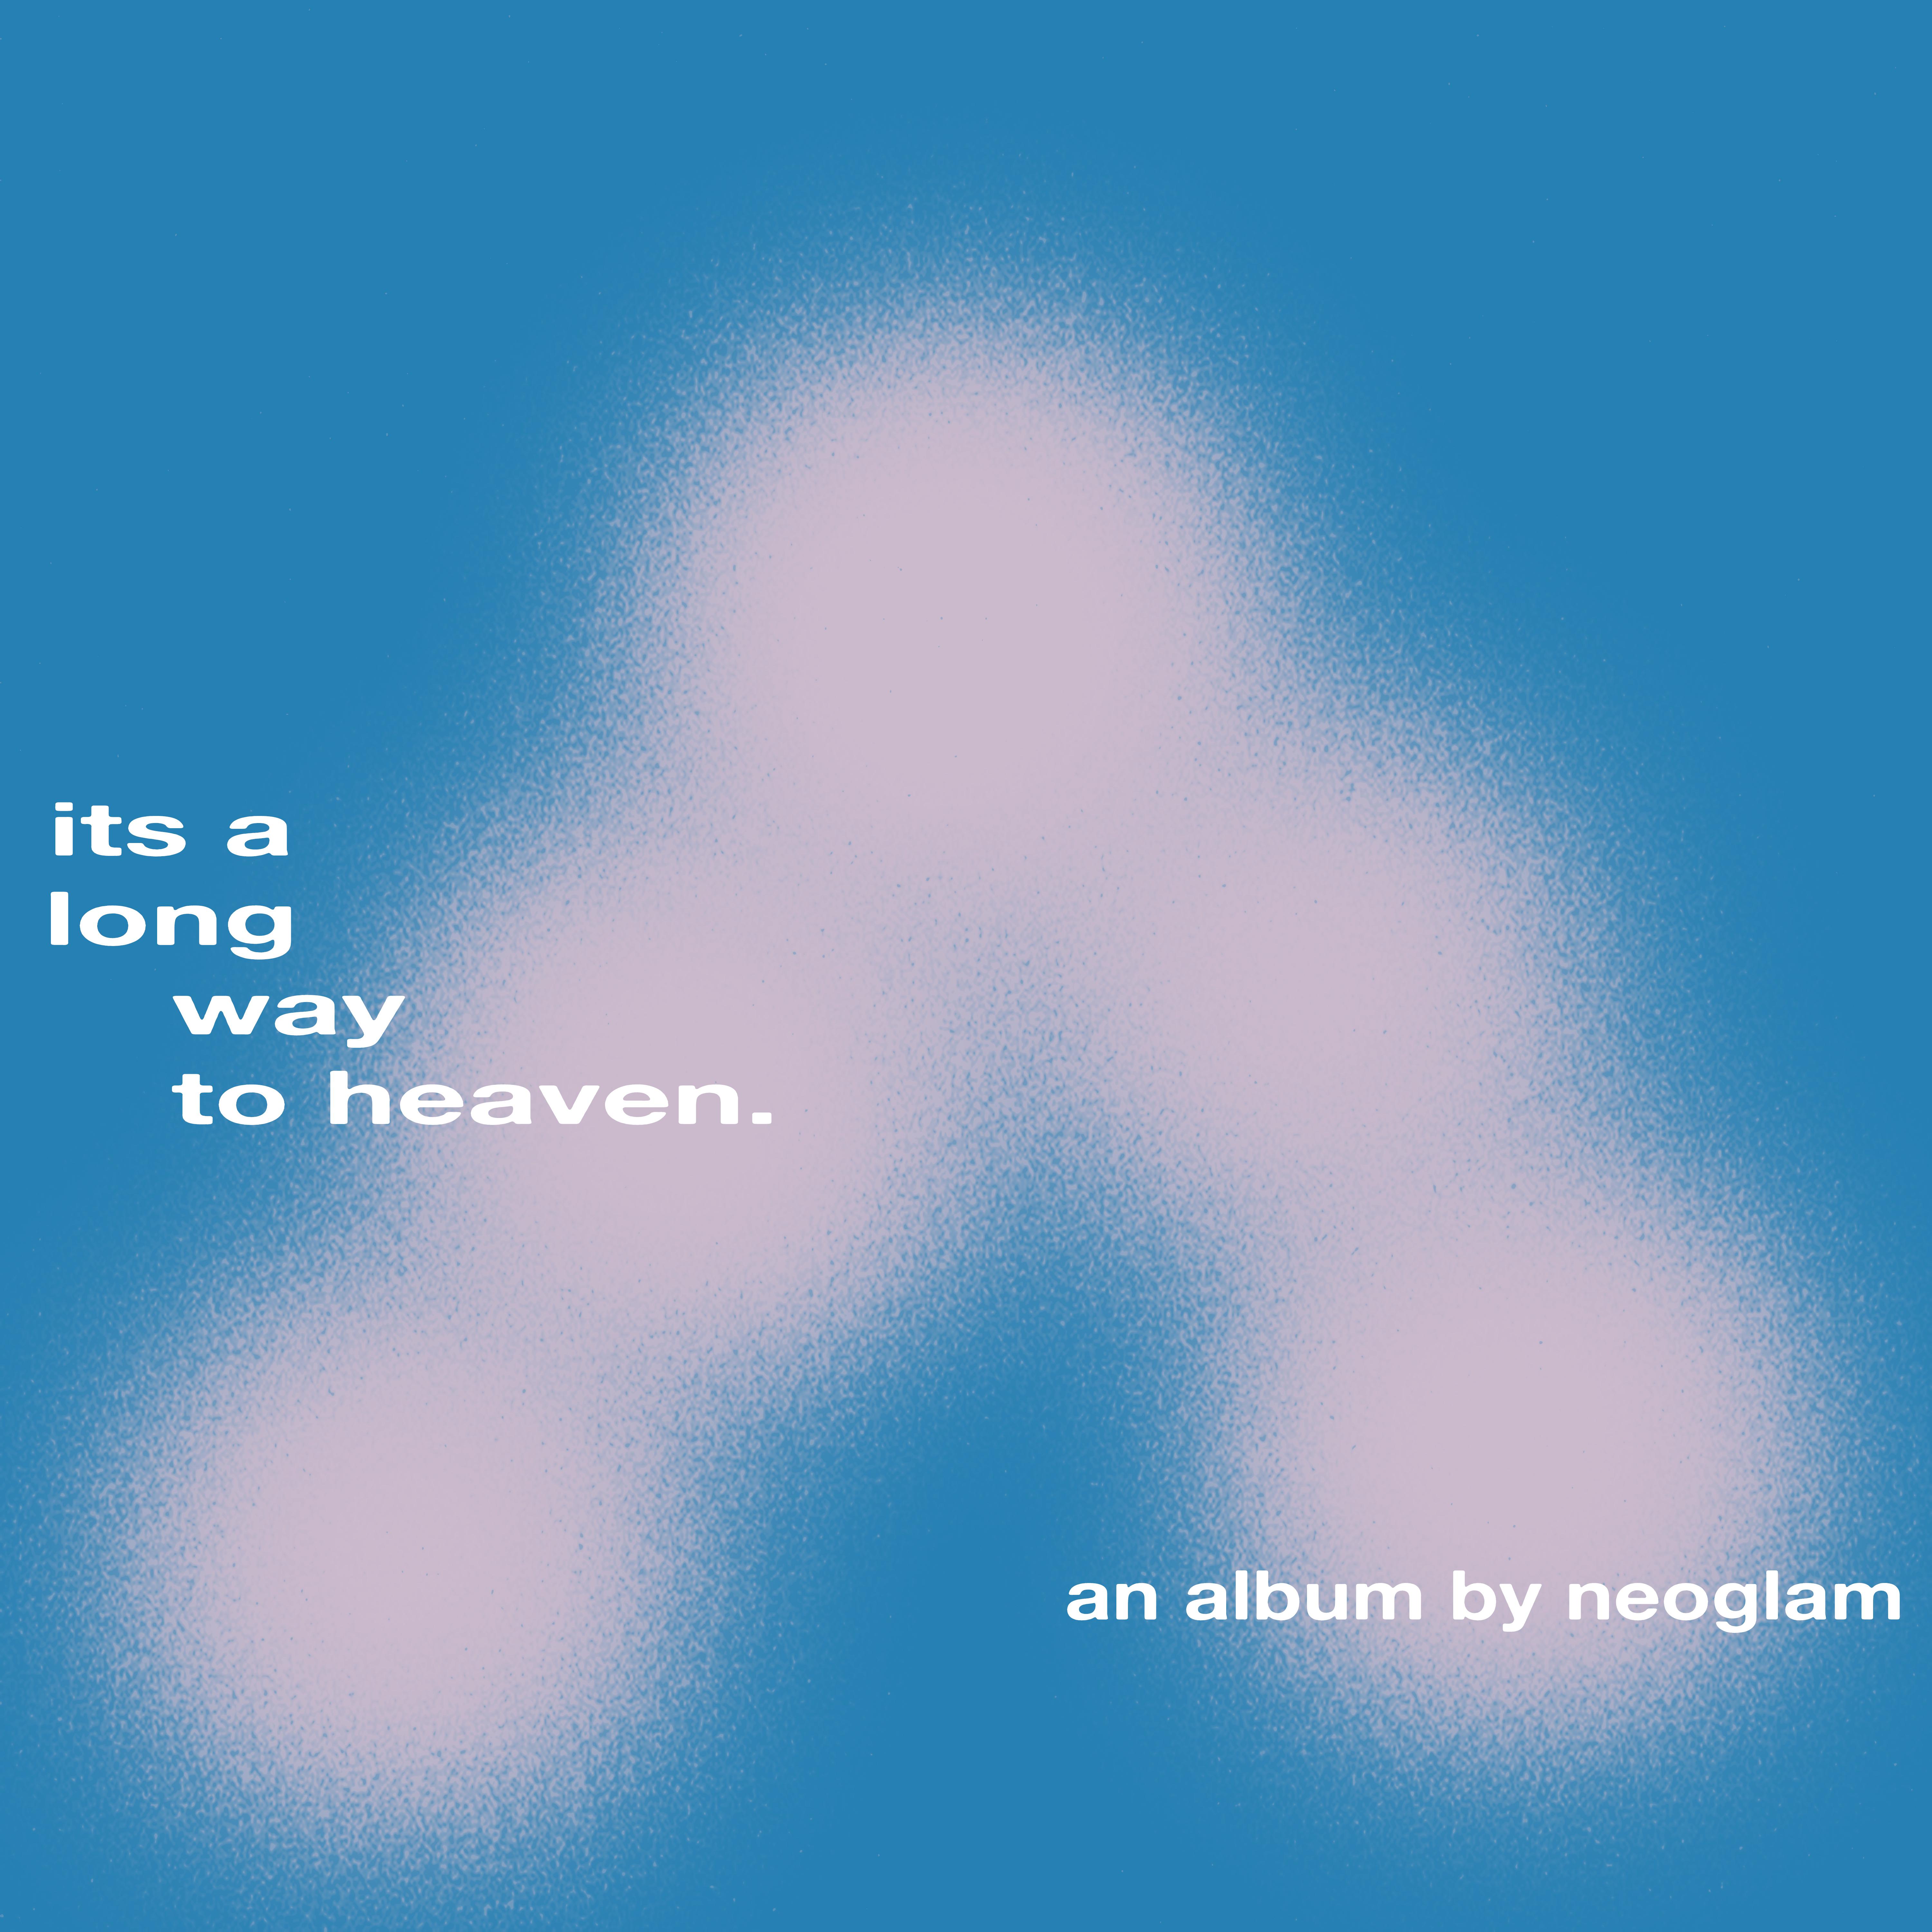 NeoGlam - it's a long way to heaven